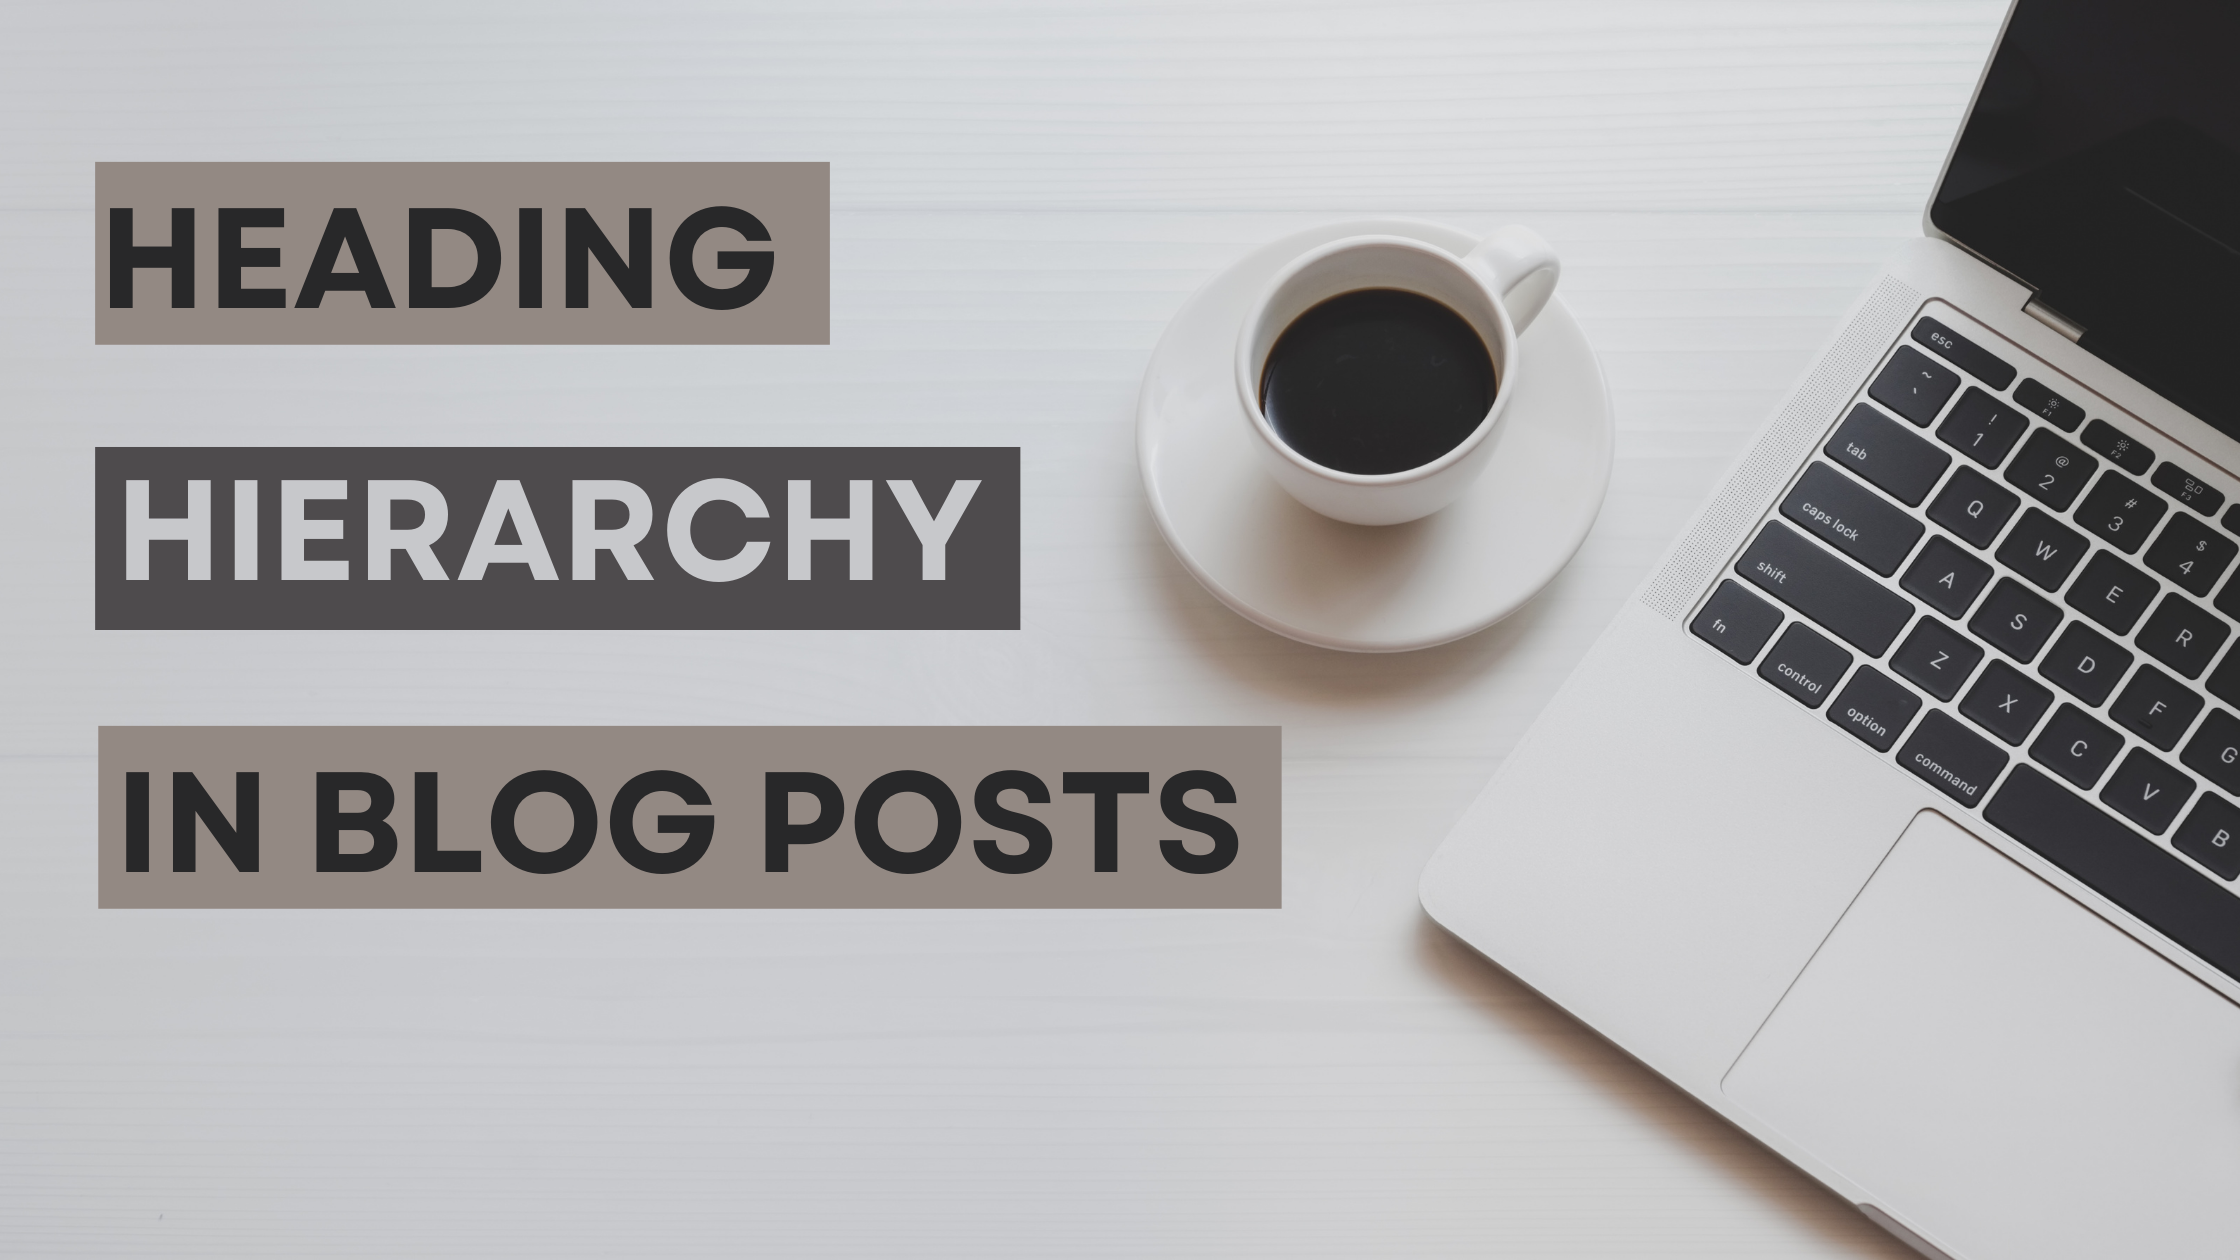 How to Establish The Heading Hierarchy in Blog Posts